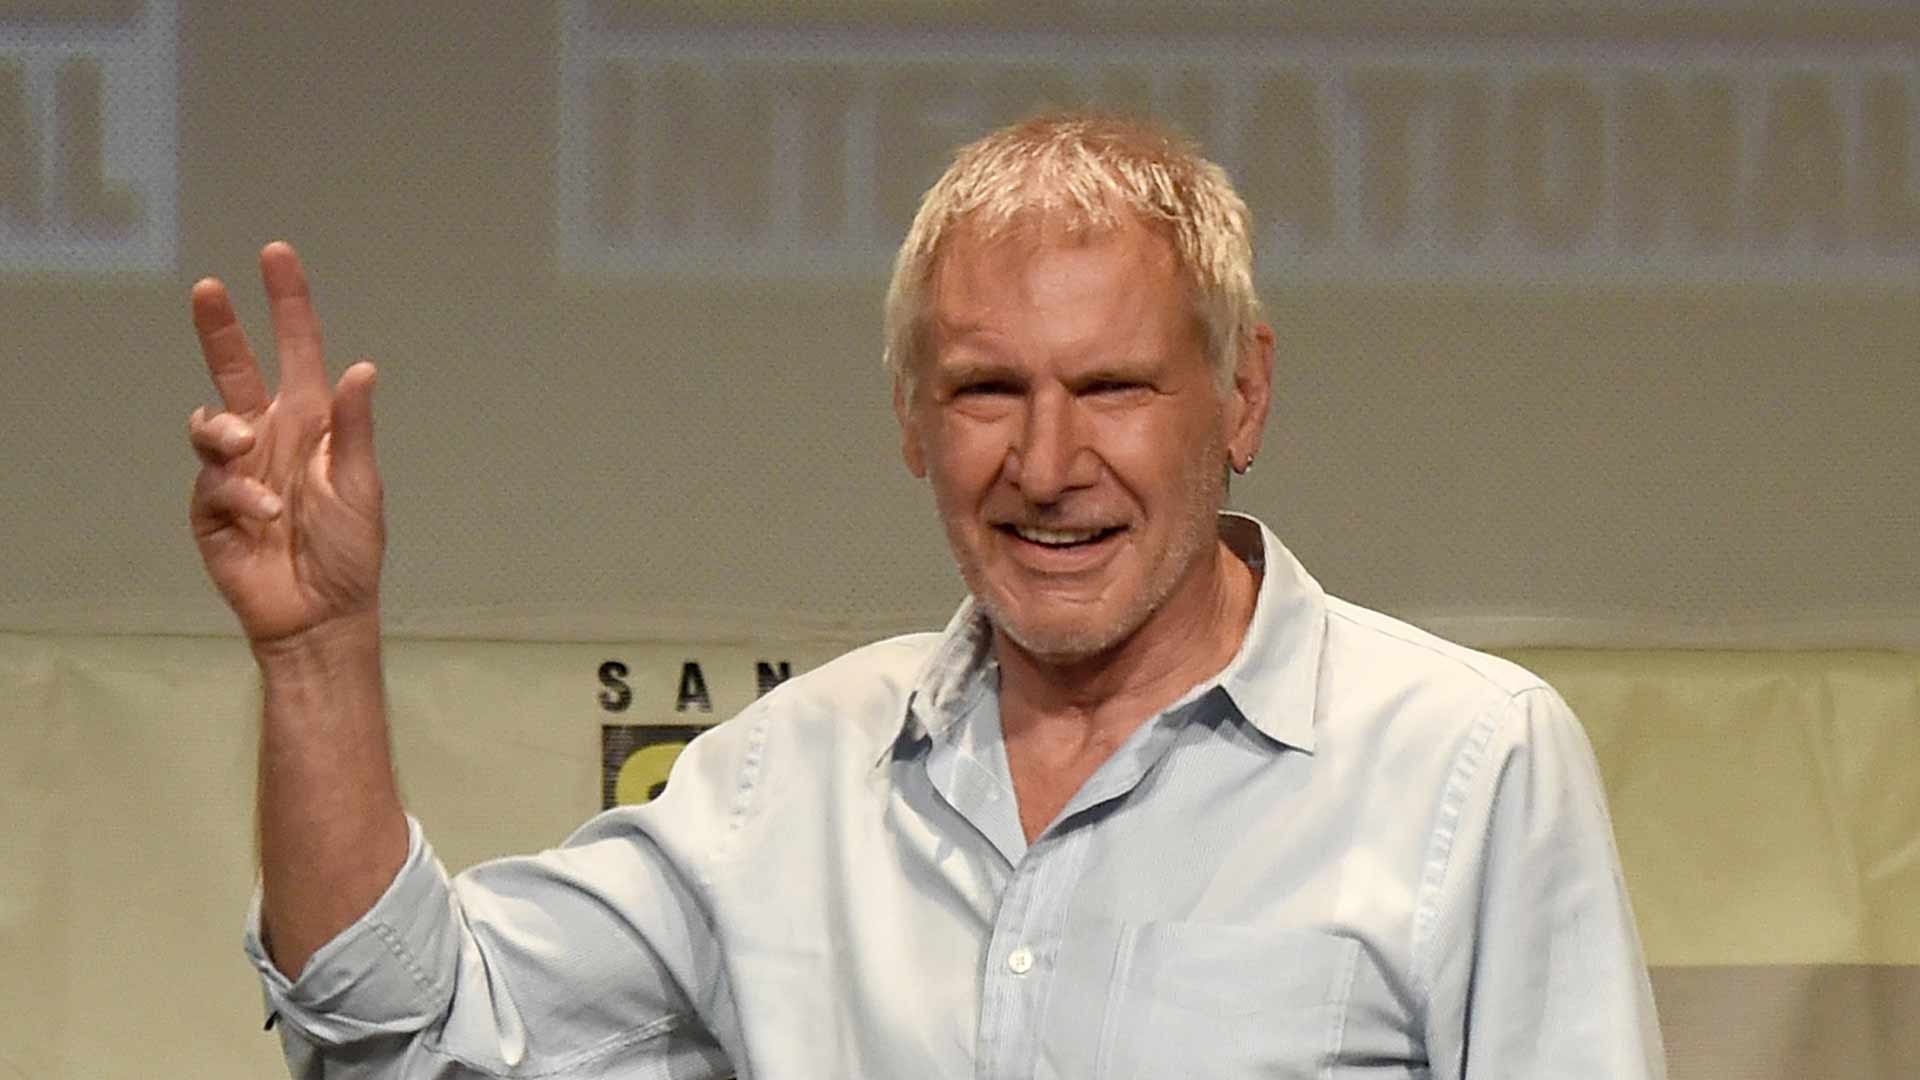 Harrison Ford Arrives on Stage at ComicCon for Star Wars The Force